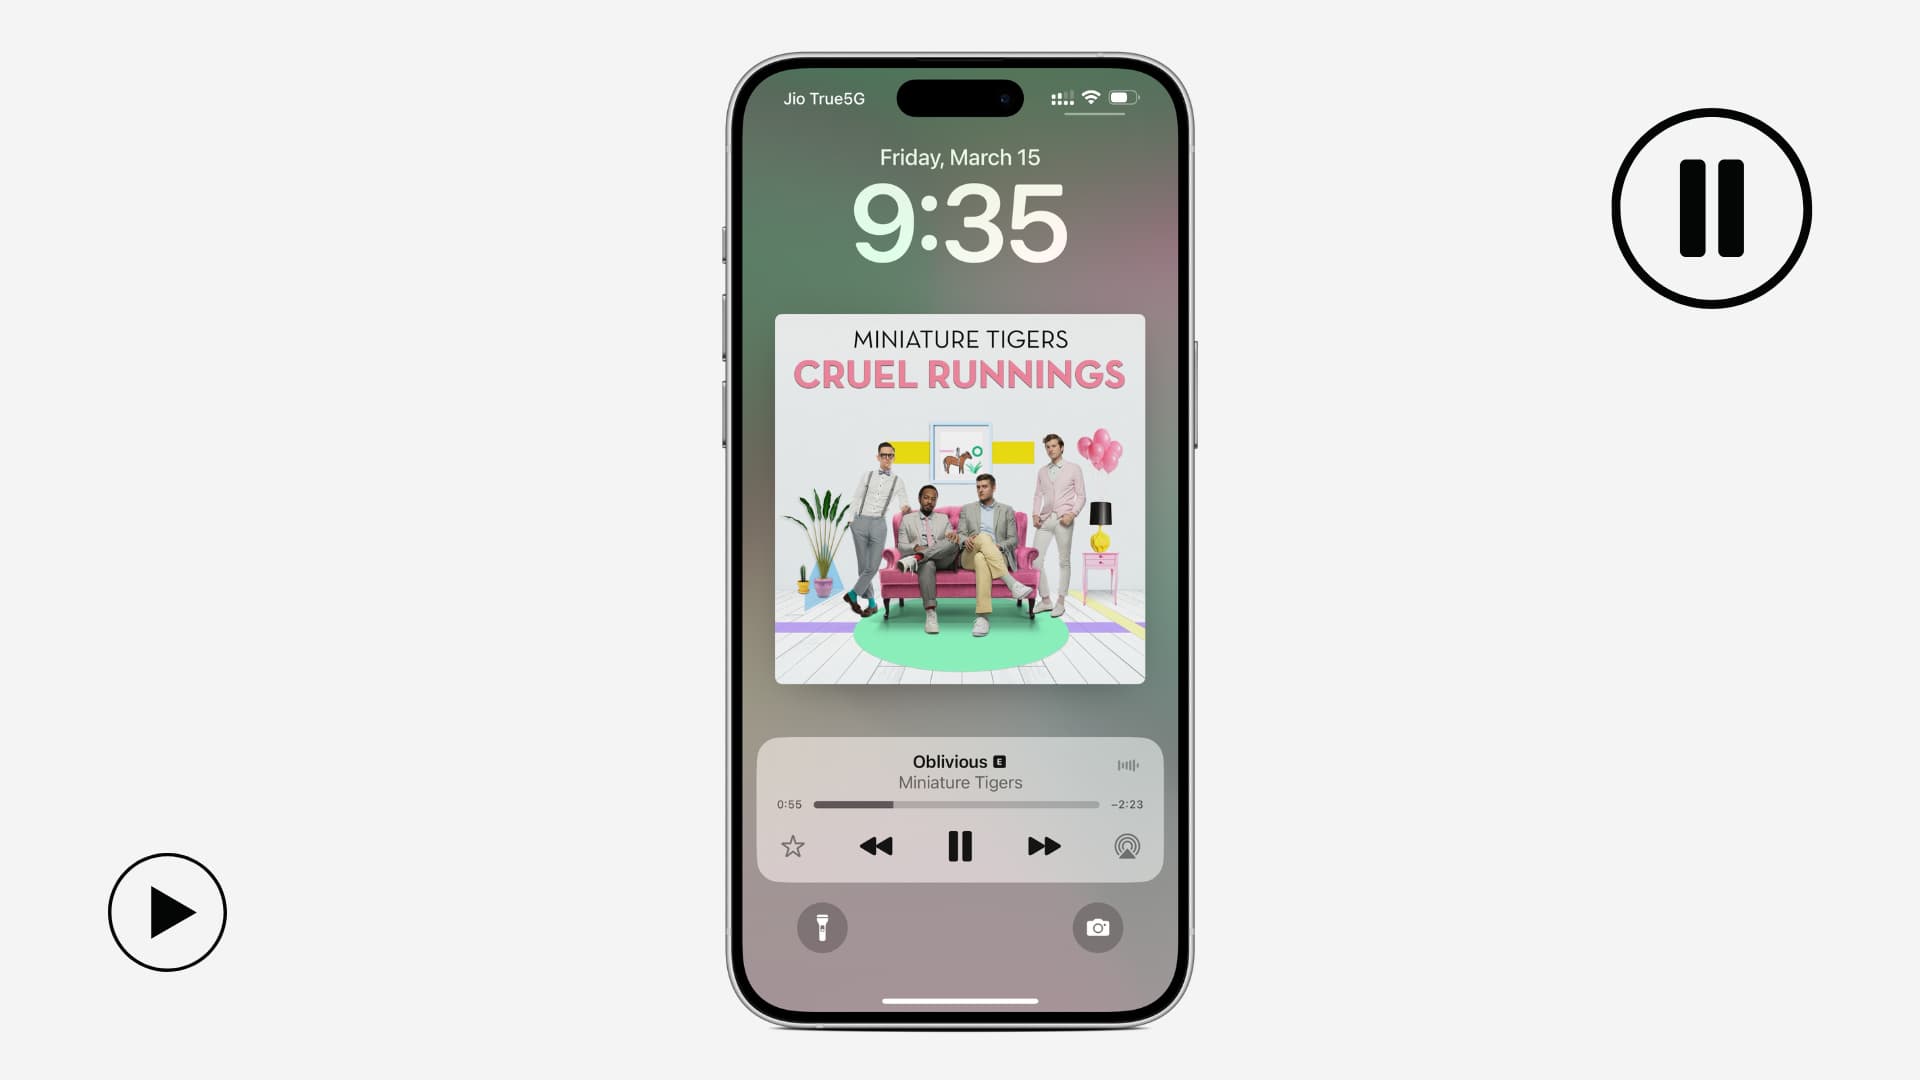 iPhone Lock Screen showing music playback